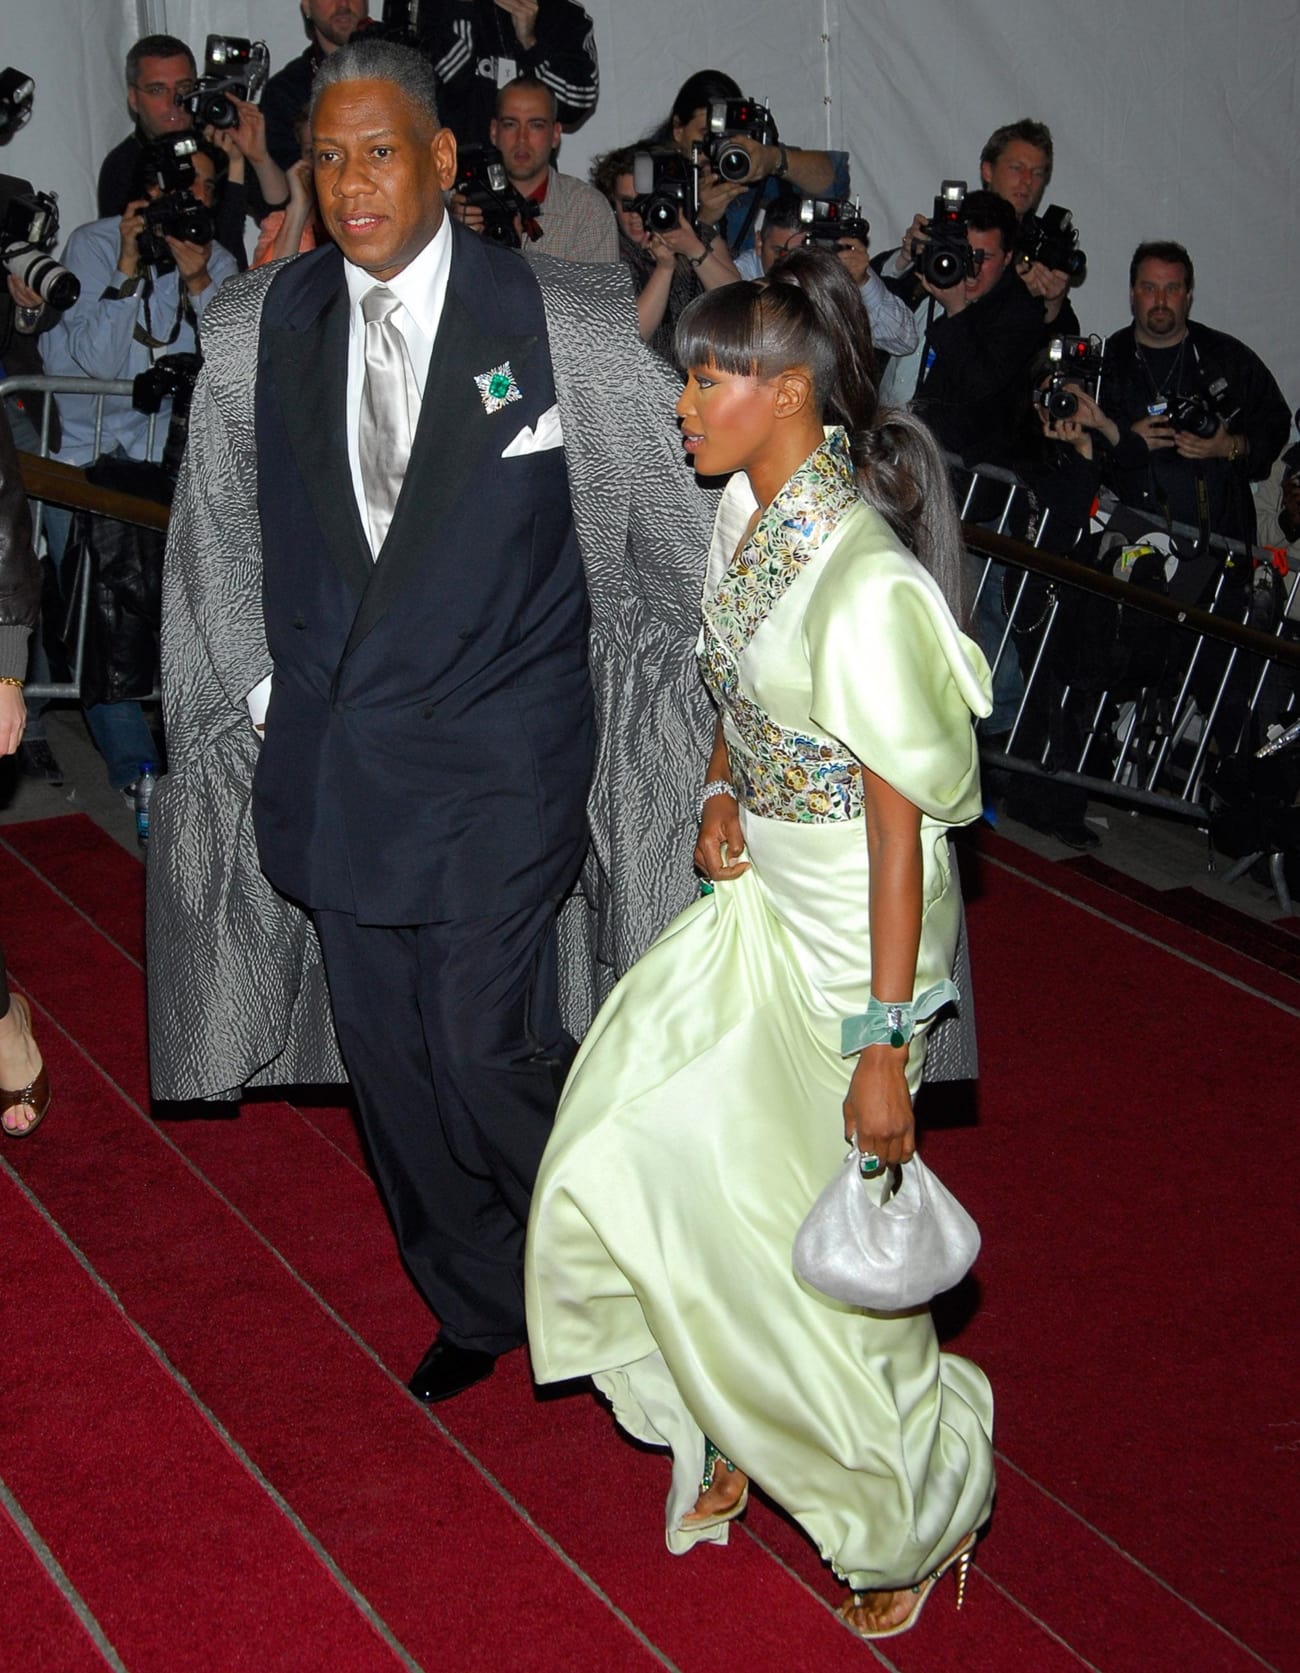 American fashion journalist André Leon Talley and Naomi Campbell during the AngloMania: Tradition and Transgression in British Fashion opening gala